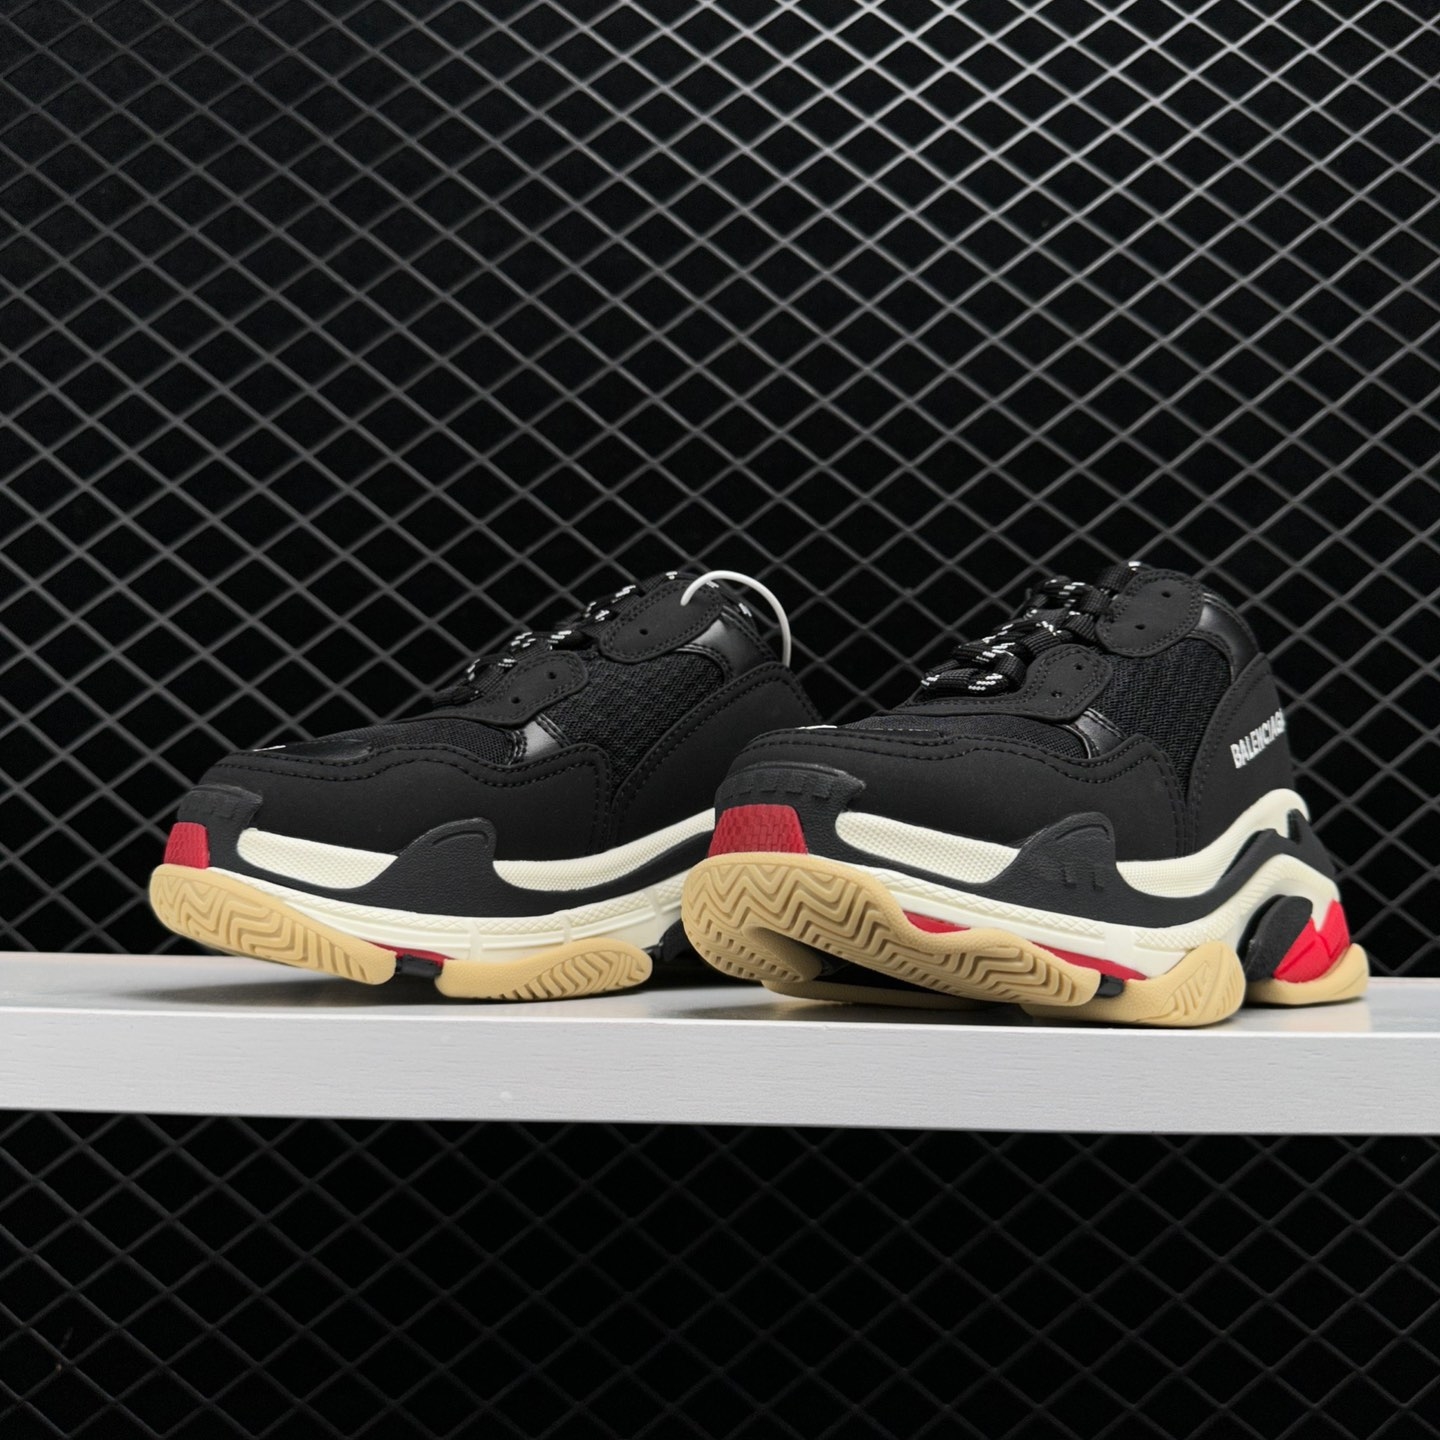 Balenciaga Triple S Black White Red 2018 Reissue 524037W09O11000 | Limited Edition Sneakers